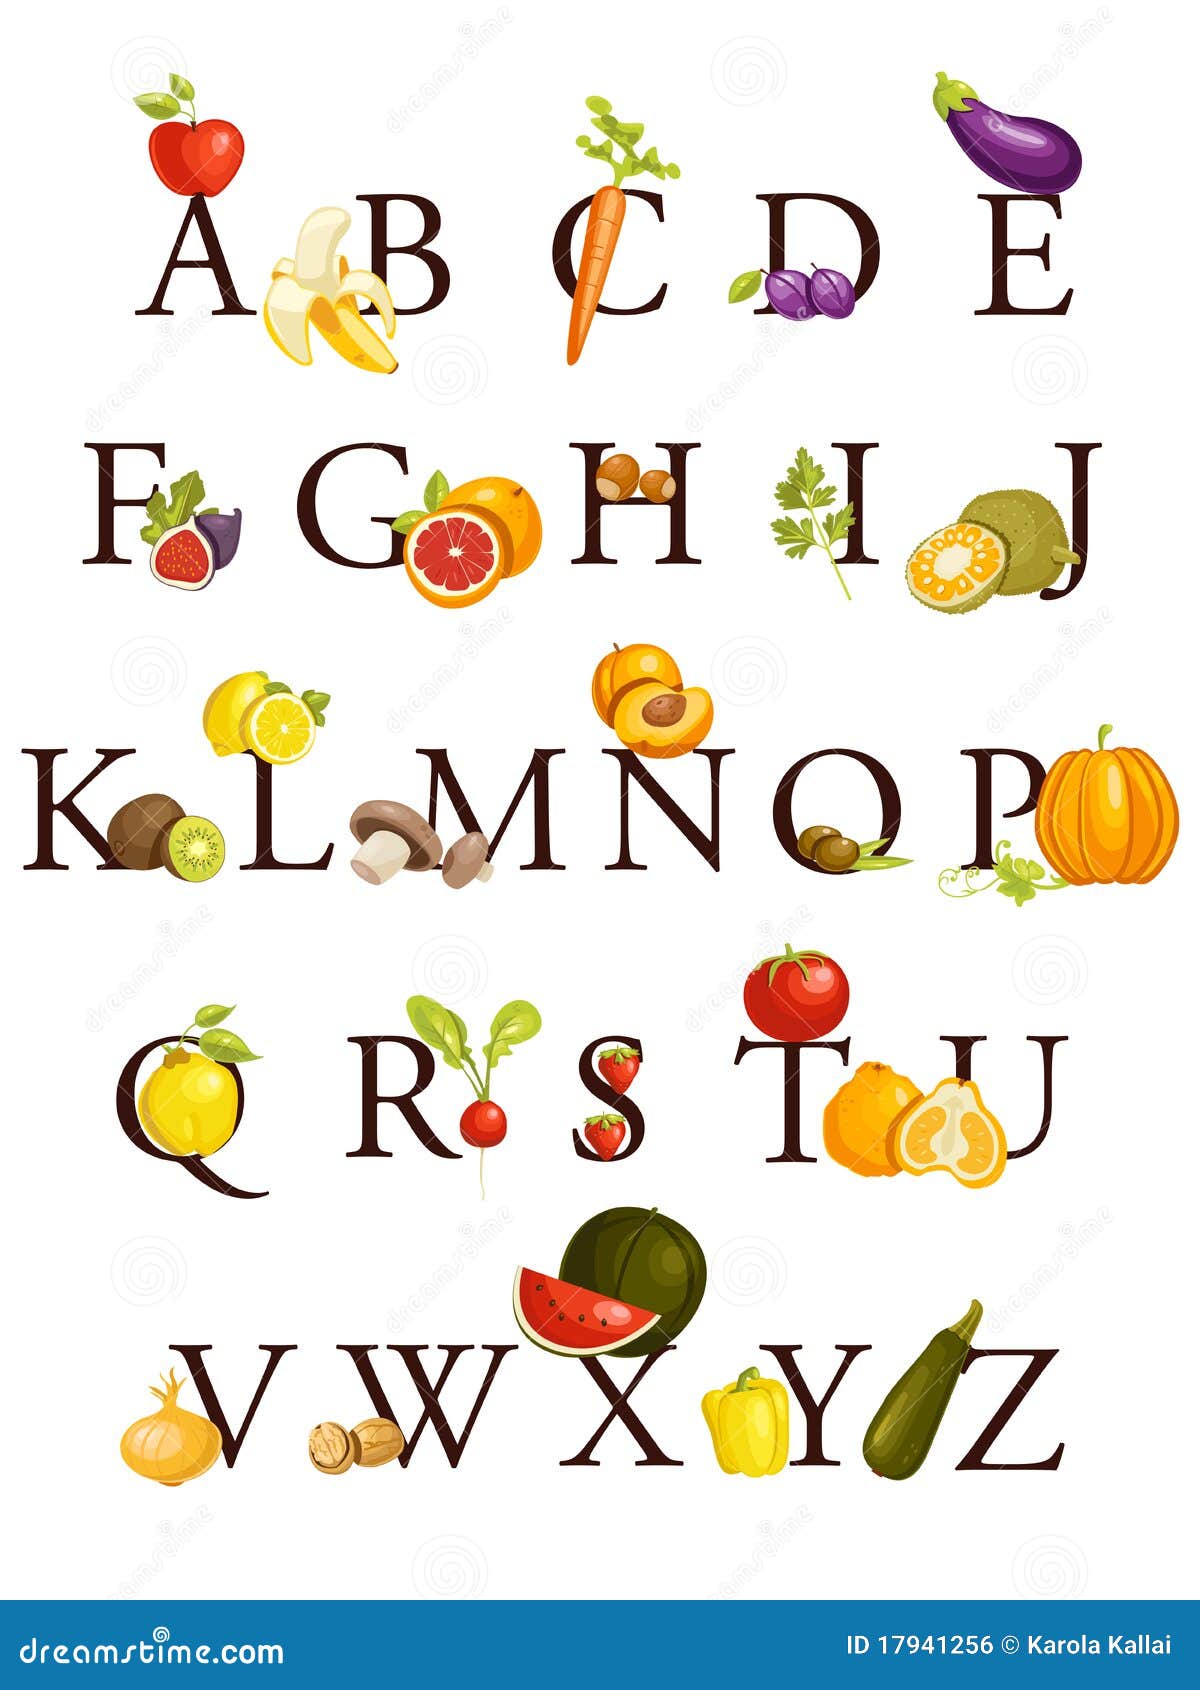 Fruits And Vegetables Alphabet Stock Vector - Illustration ...